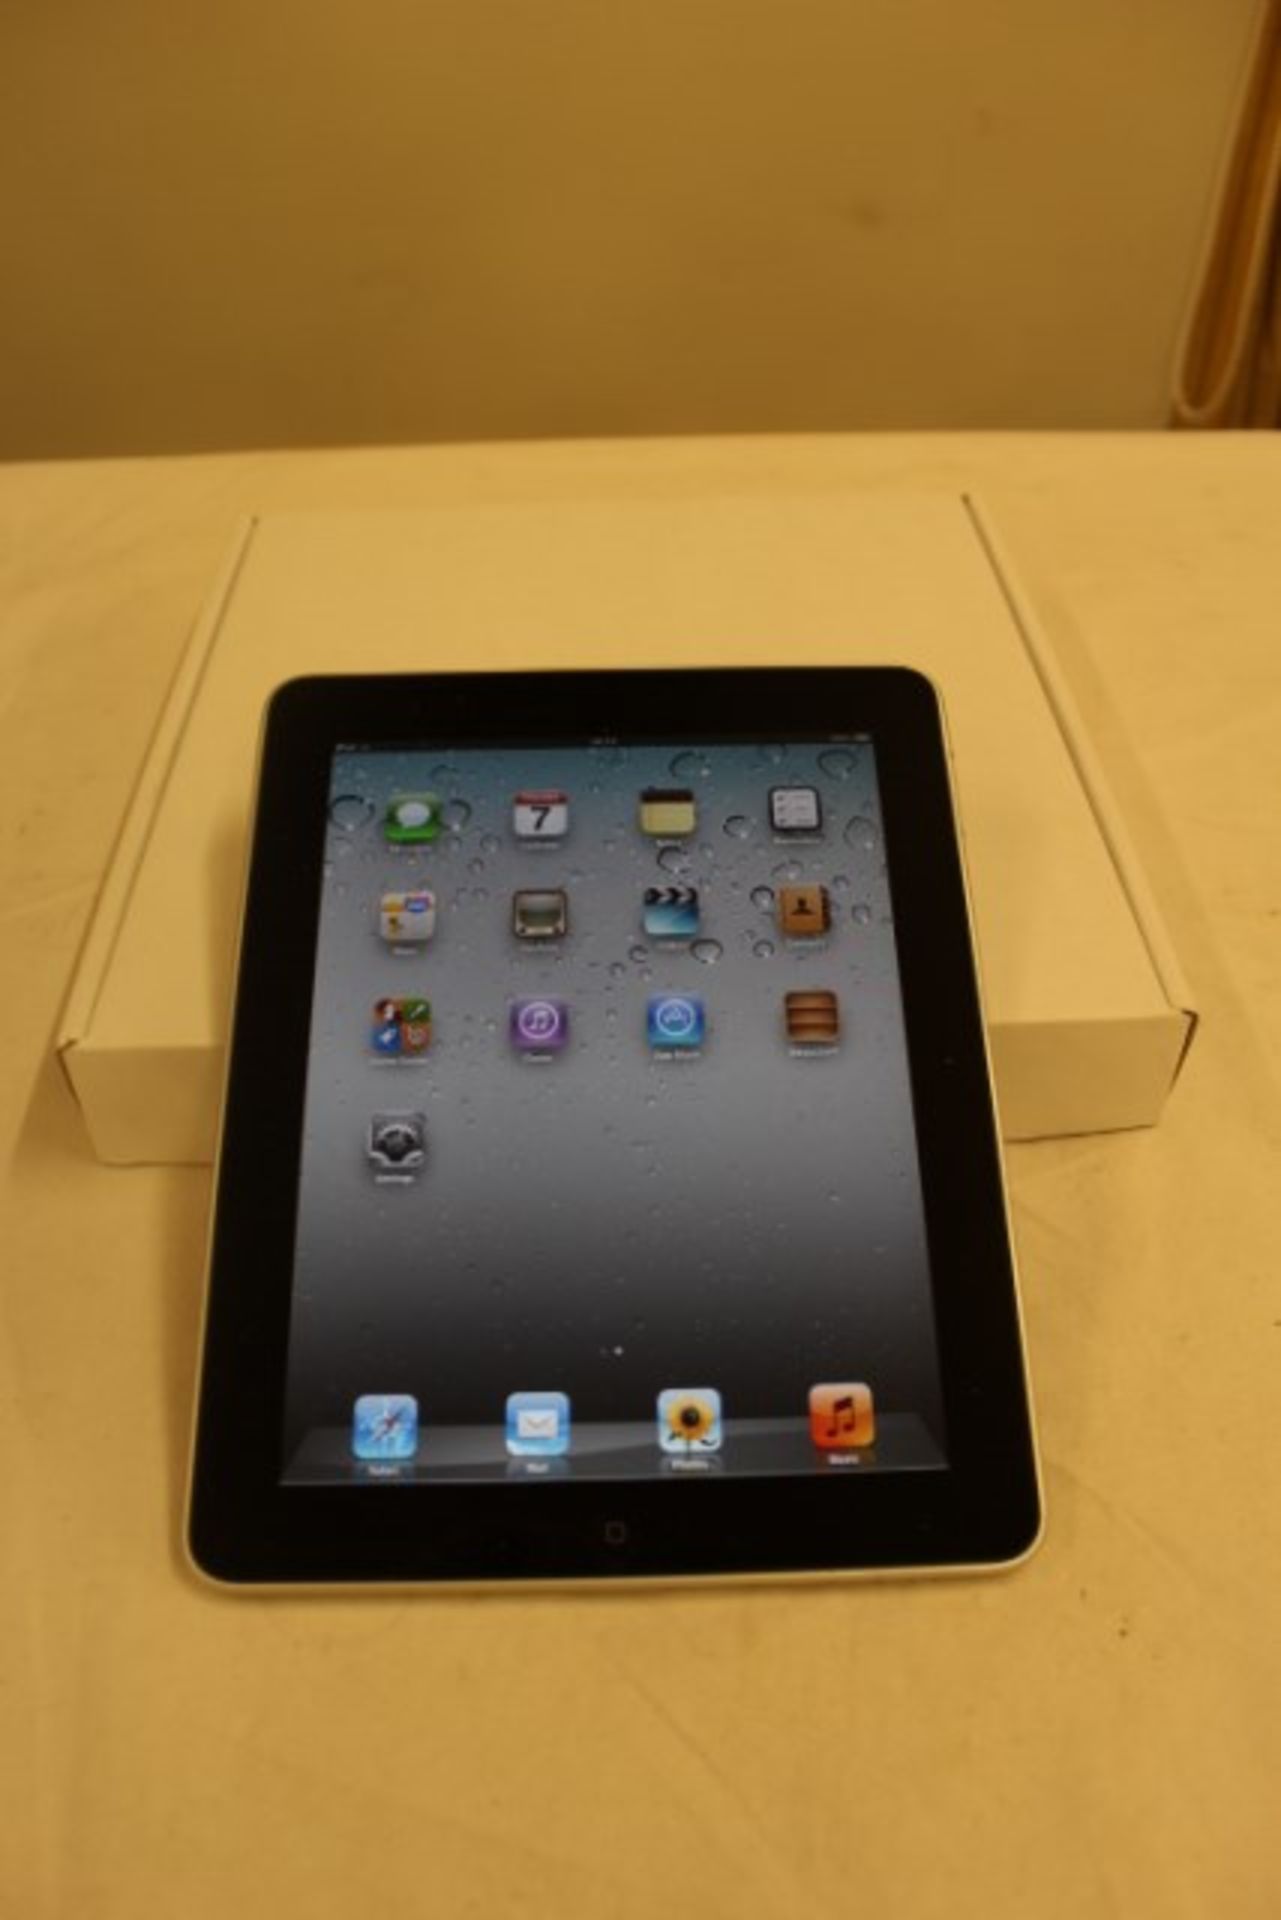 V Apple iPad 16Gb Wi-Fi with box and warranty (some units may be scratched or dented) - Image 2 of 3